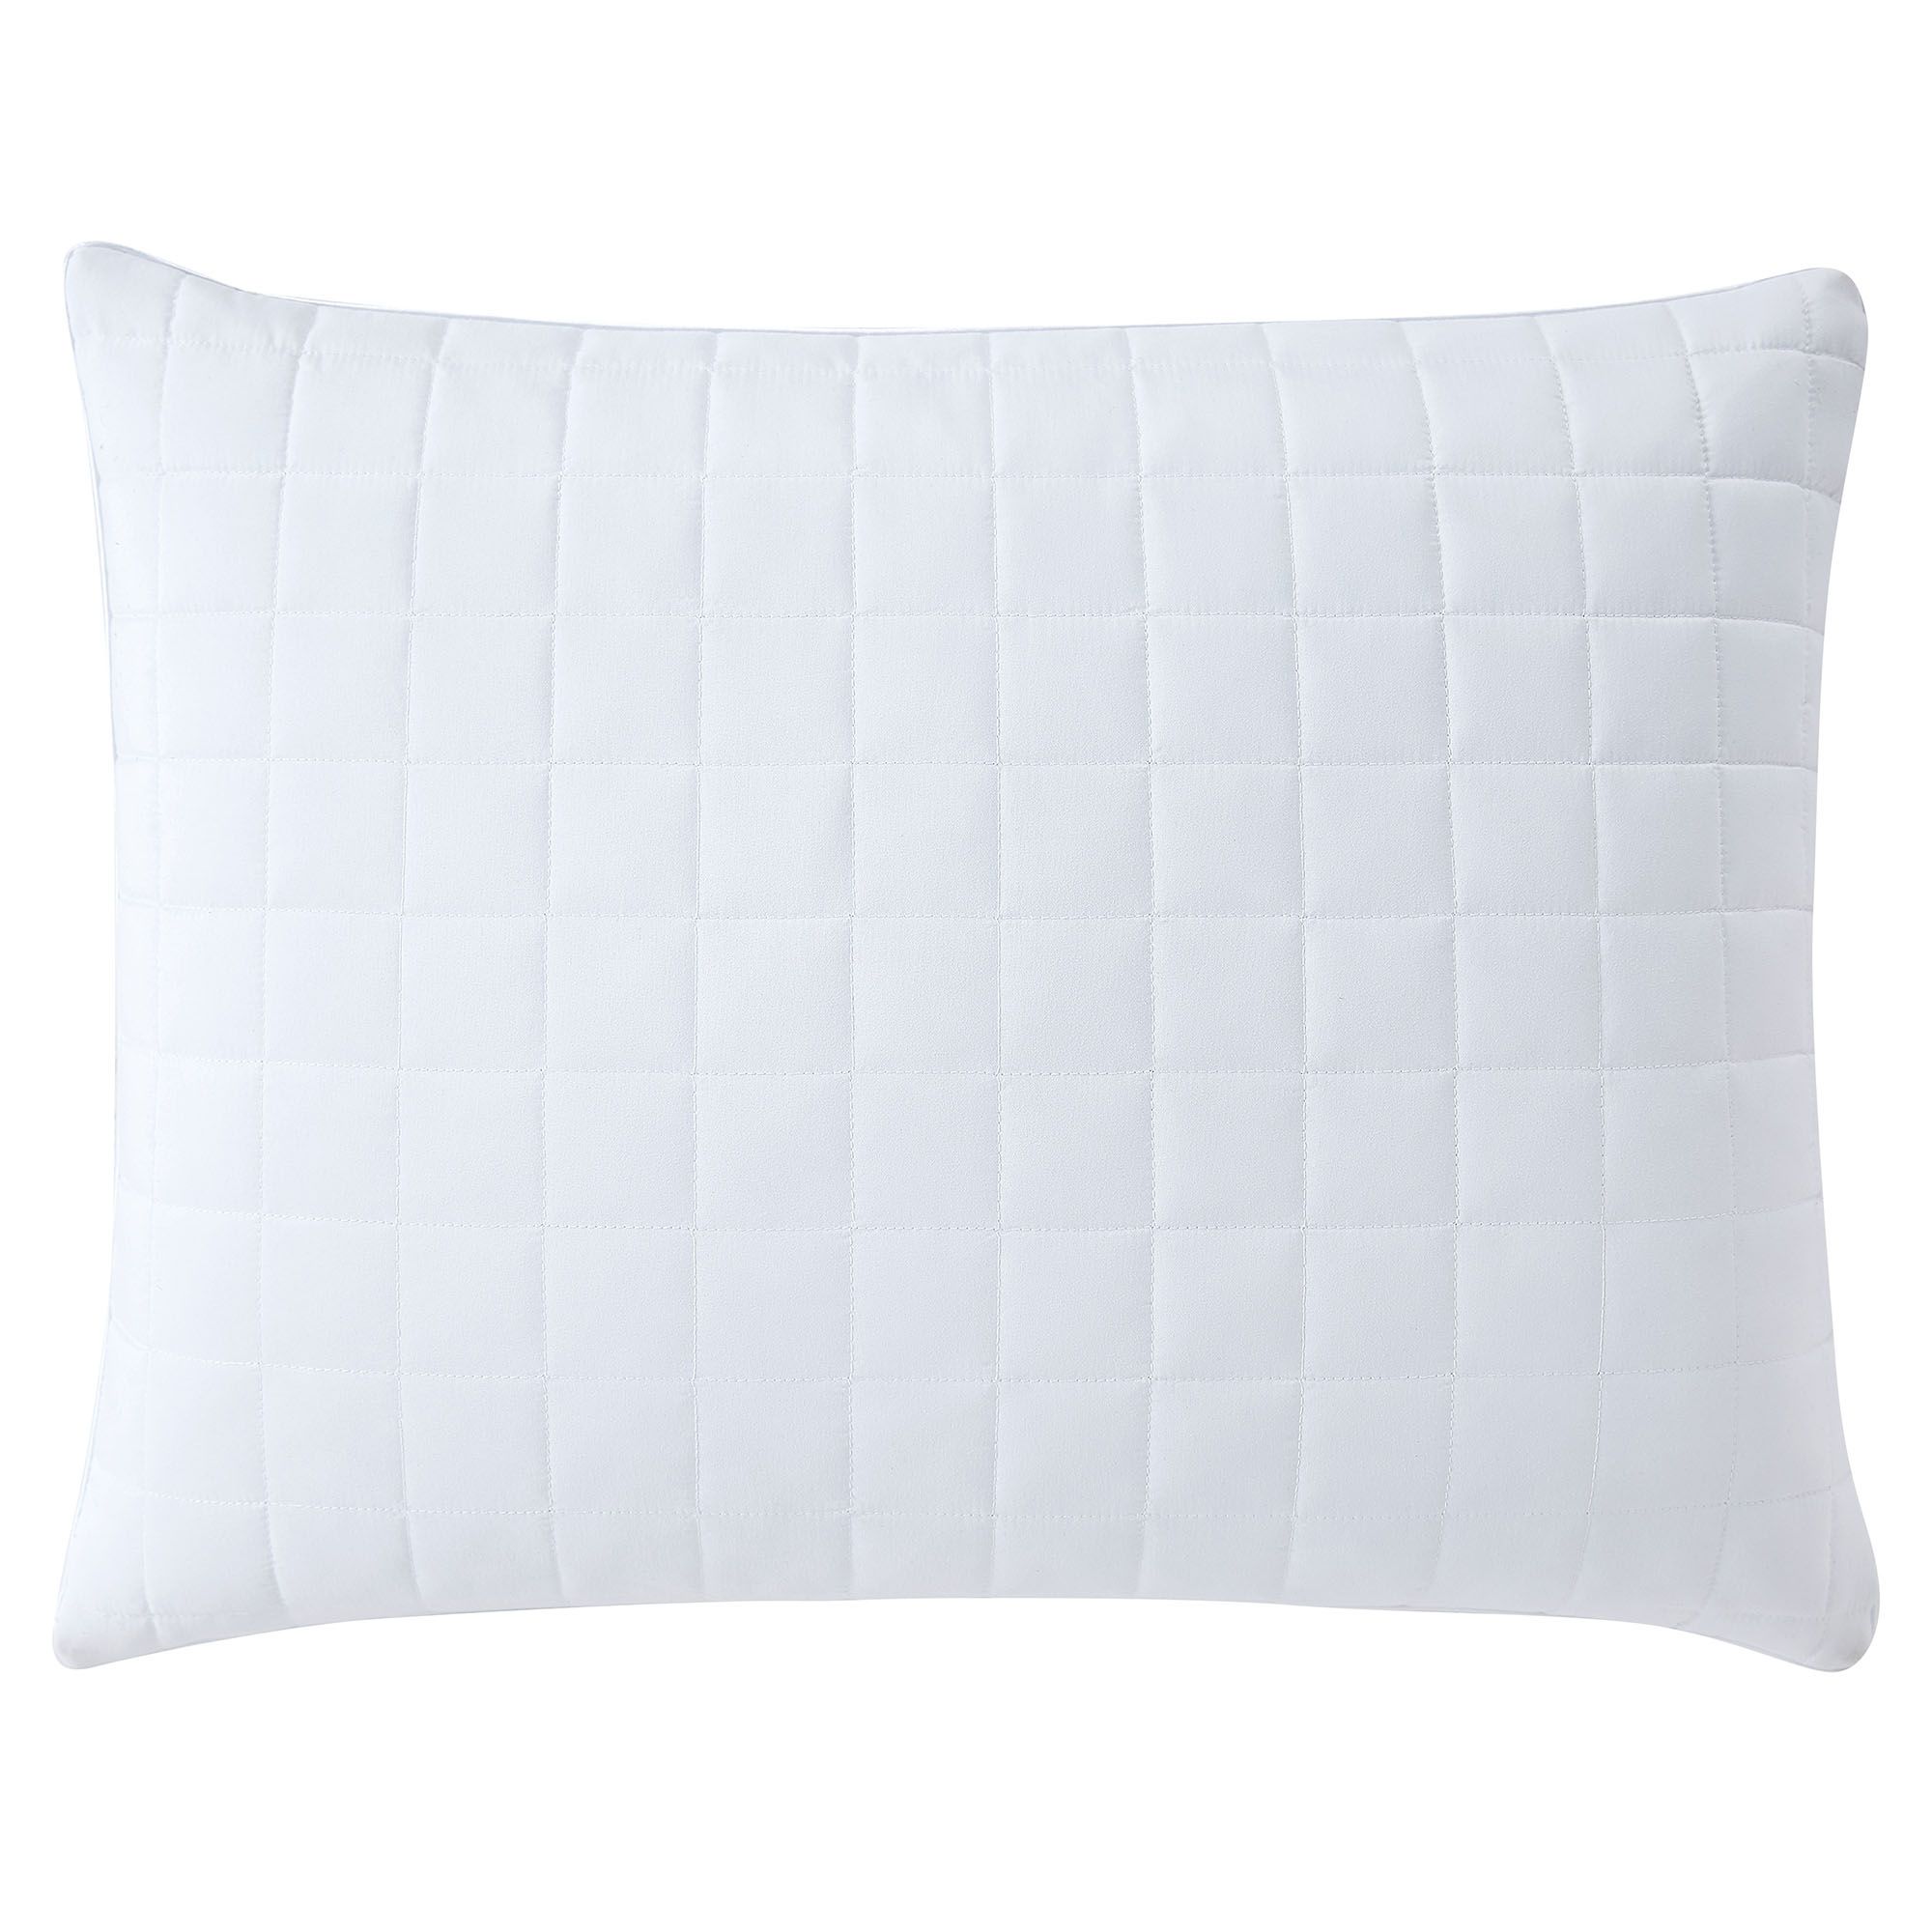 Computer Pillow, Assorted Colors